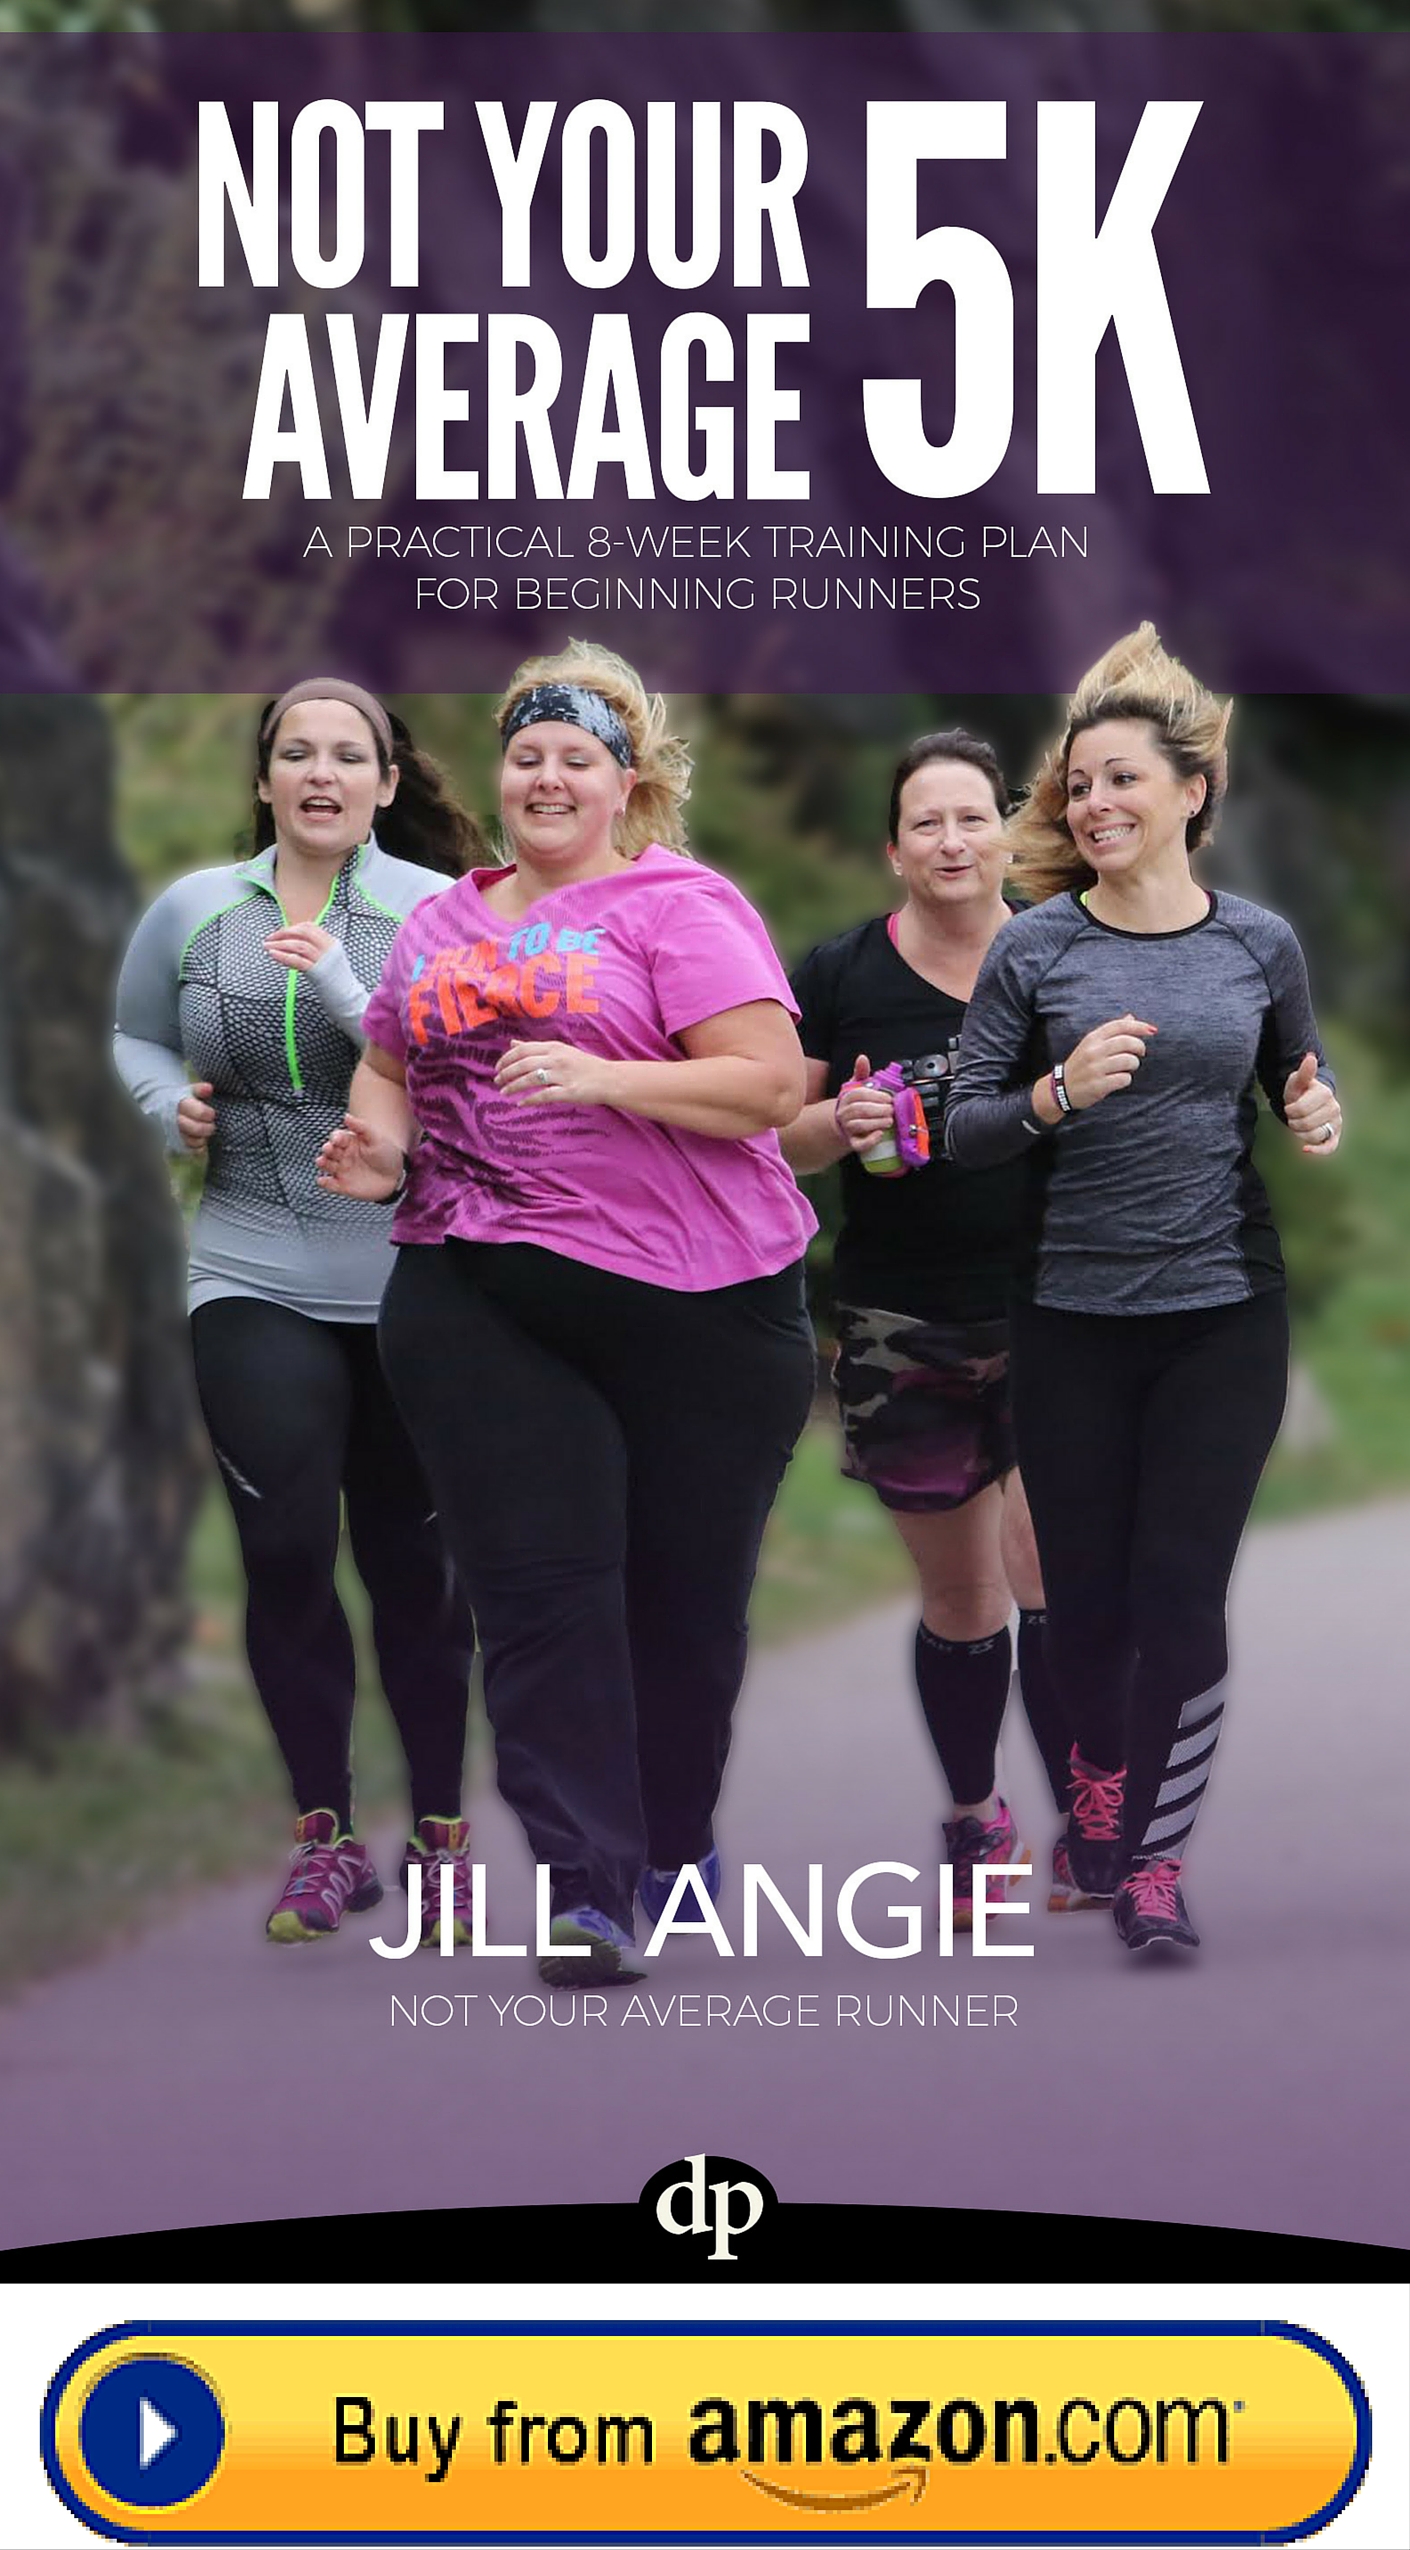 Not Your Average 5K book by Jill Angie - Not Your Average Runner